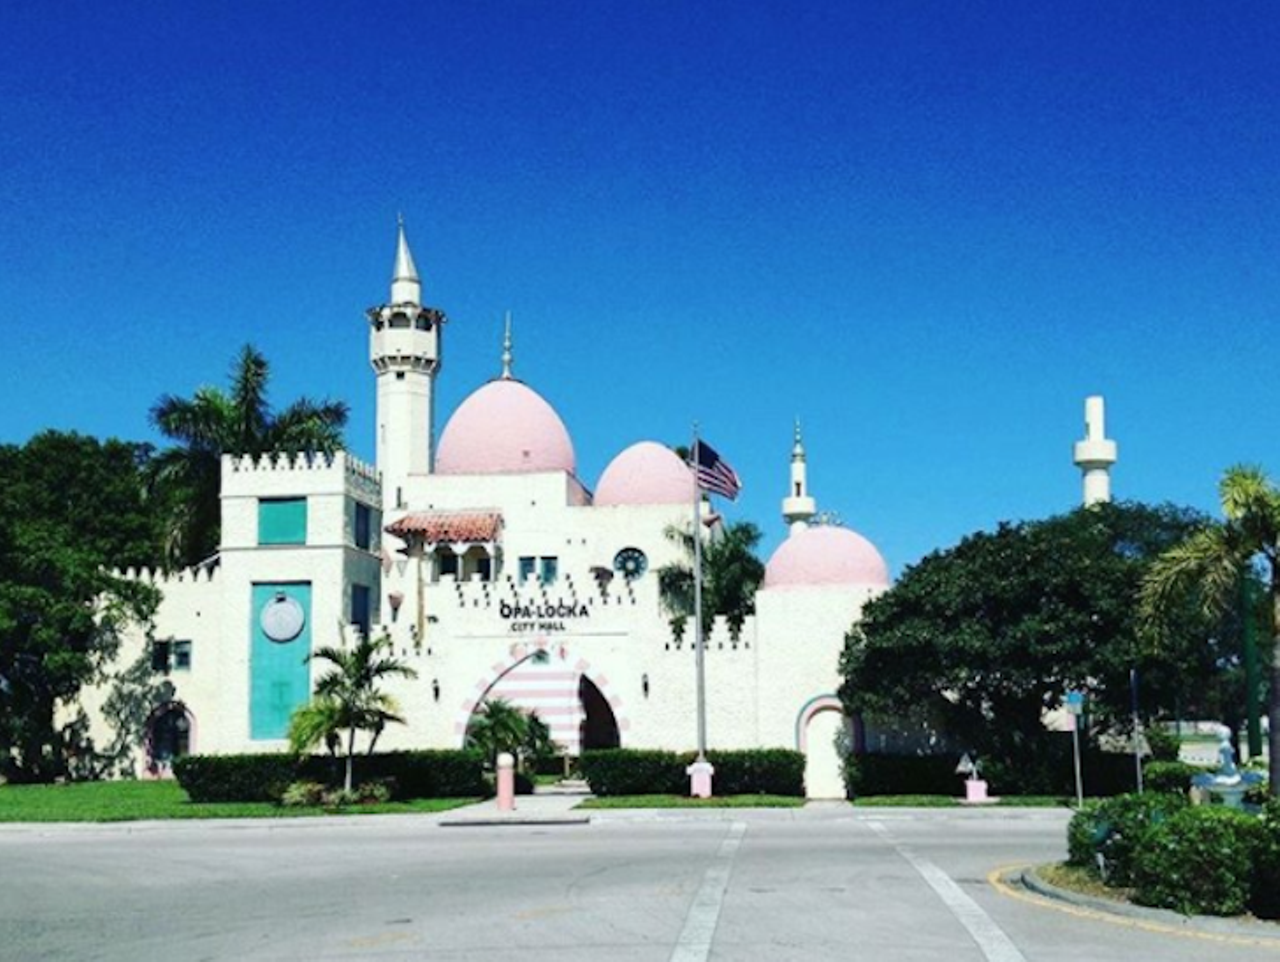 Opa-locka
Opa-locka is a South Florida town developed in the 1920s to look like something straight out of Arabian Nights. Although it stands out for its Moorish-style buildings, it&#146;s perhaps best known as the location where Amelia Earhart began her ill-fated trip around the world.
Photo via theundeniable/Instagram